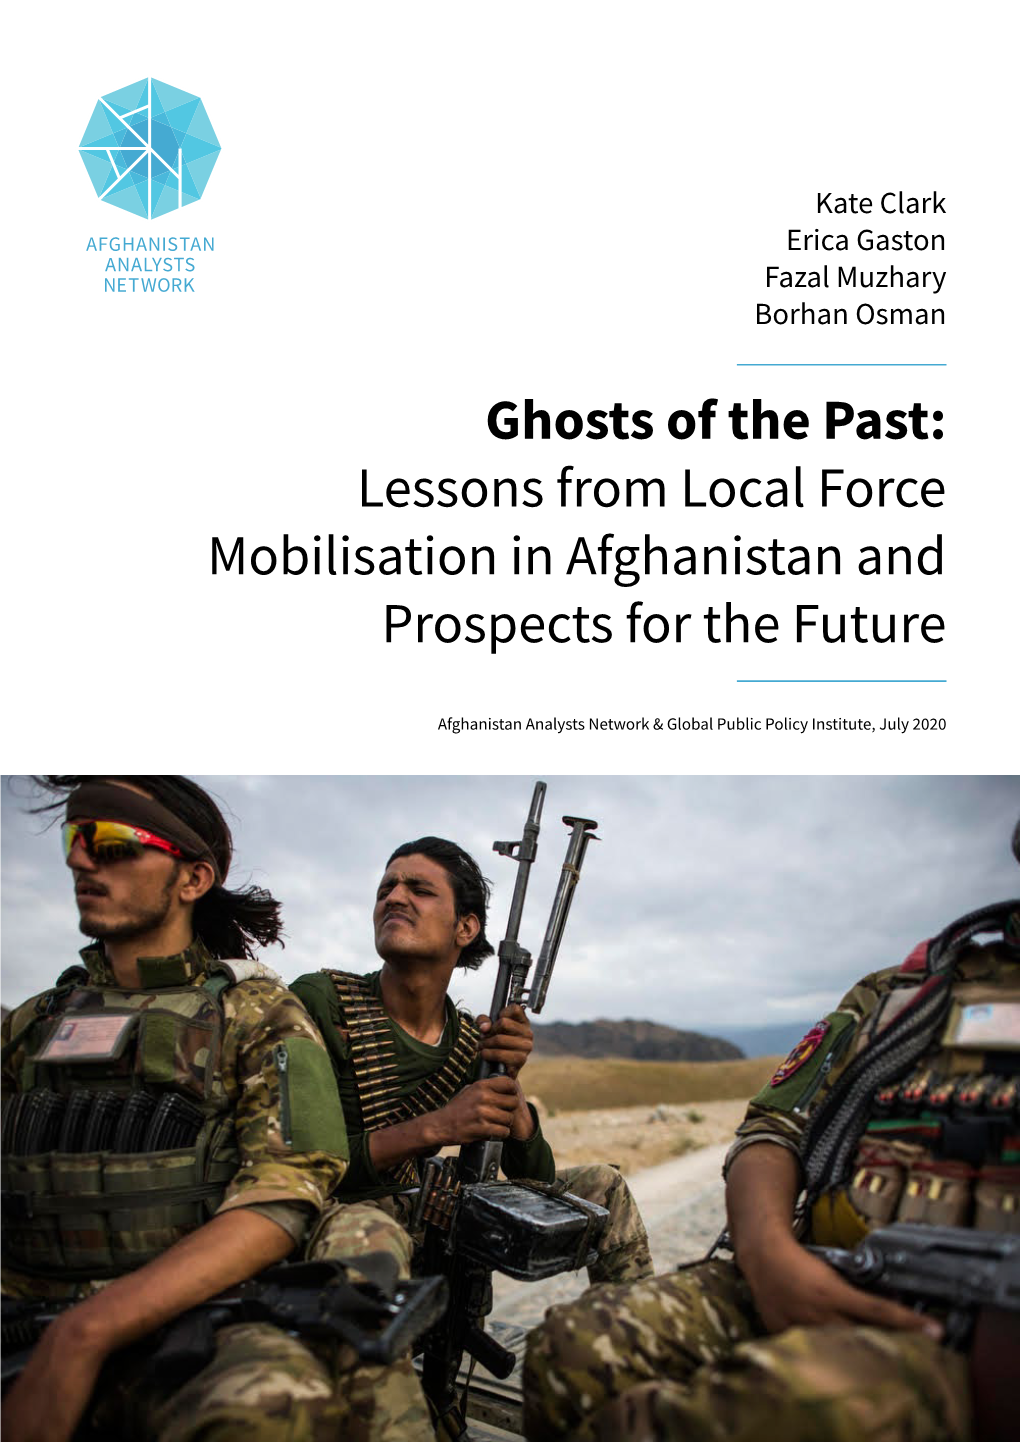 Ghosts of the Past: Lessons from Local Force Mobilisation in Afghanistan and Prospects for the Future